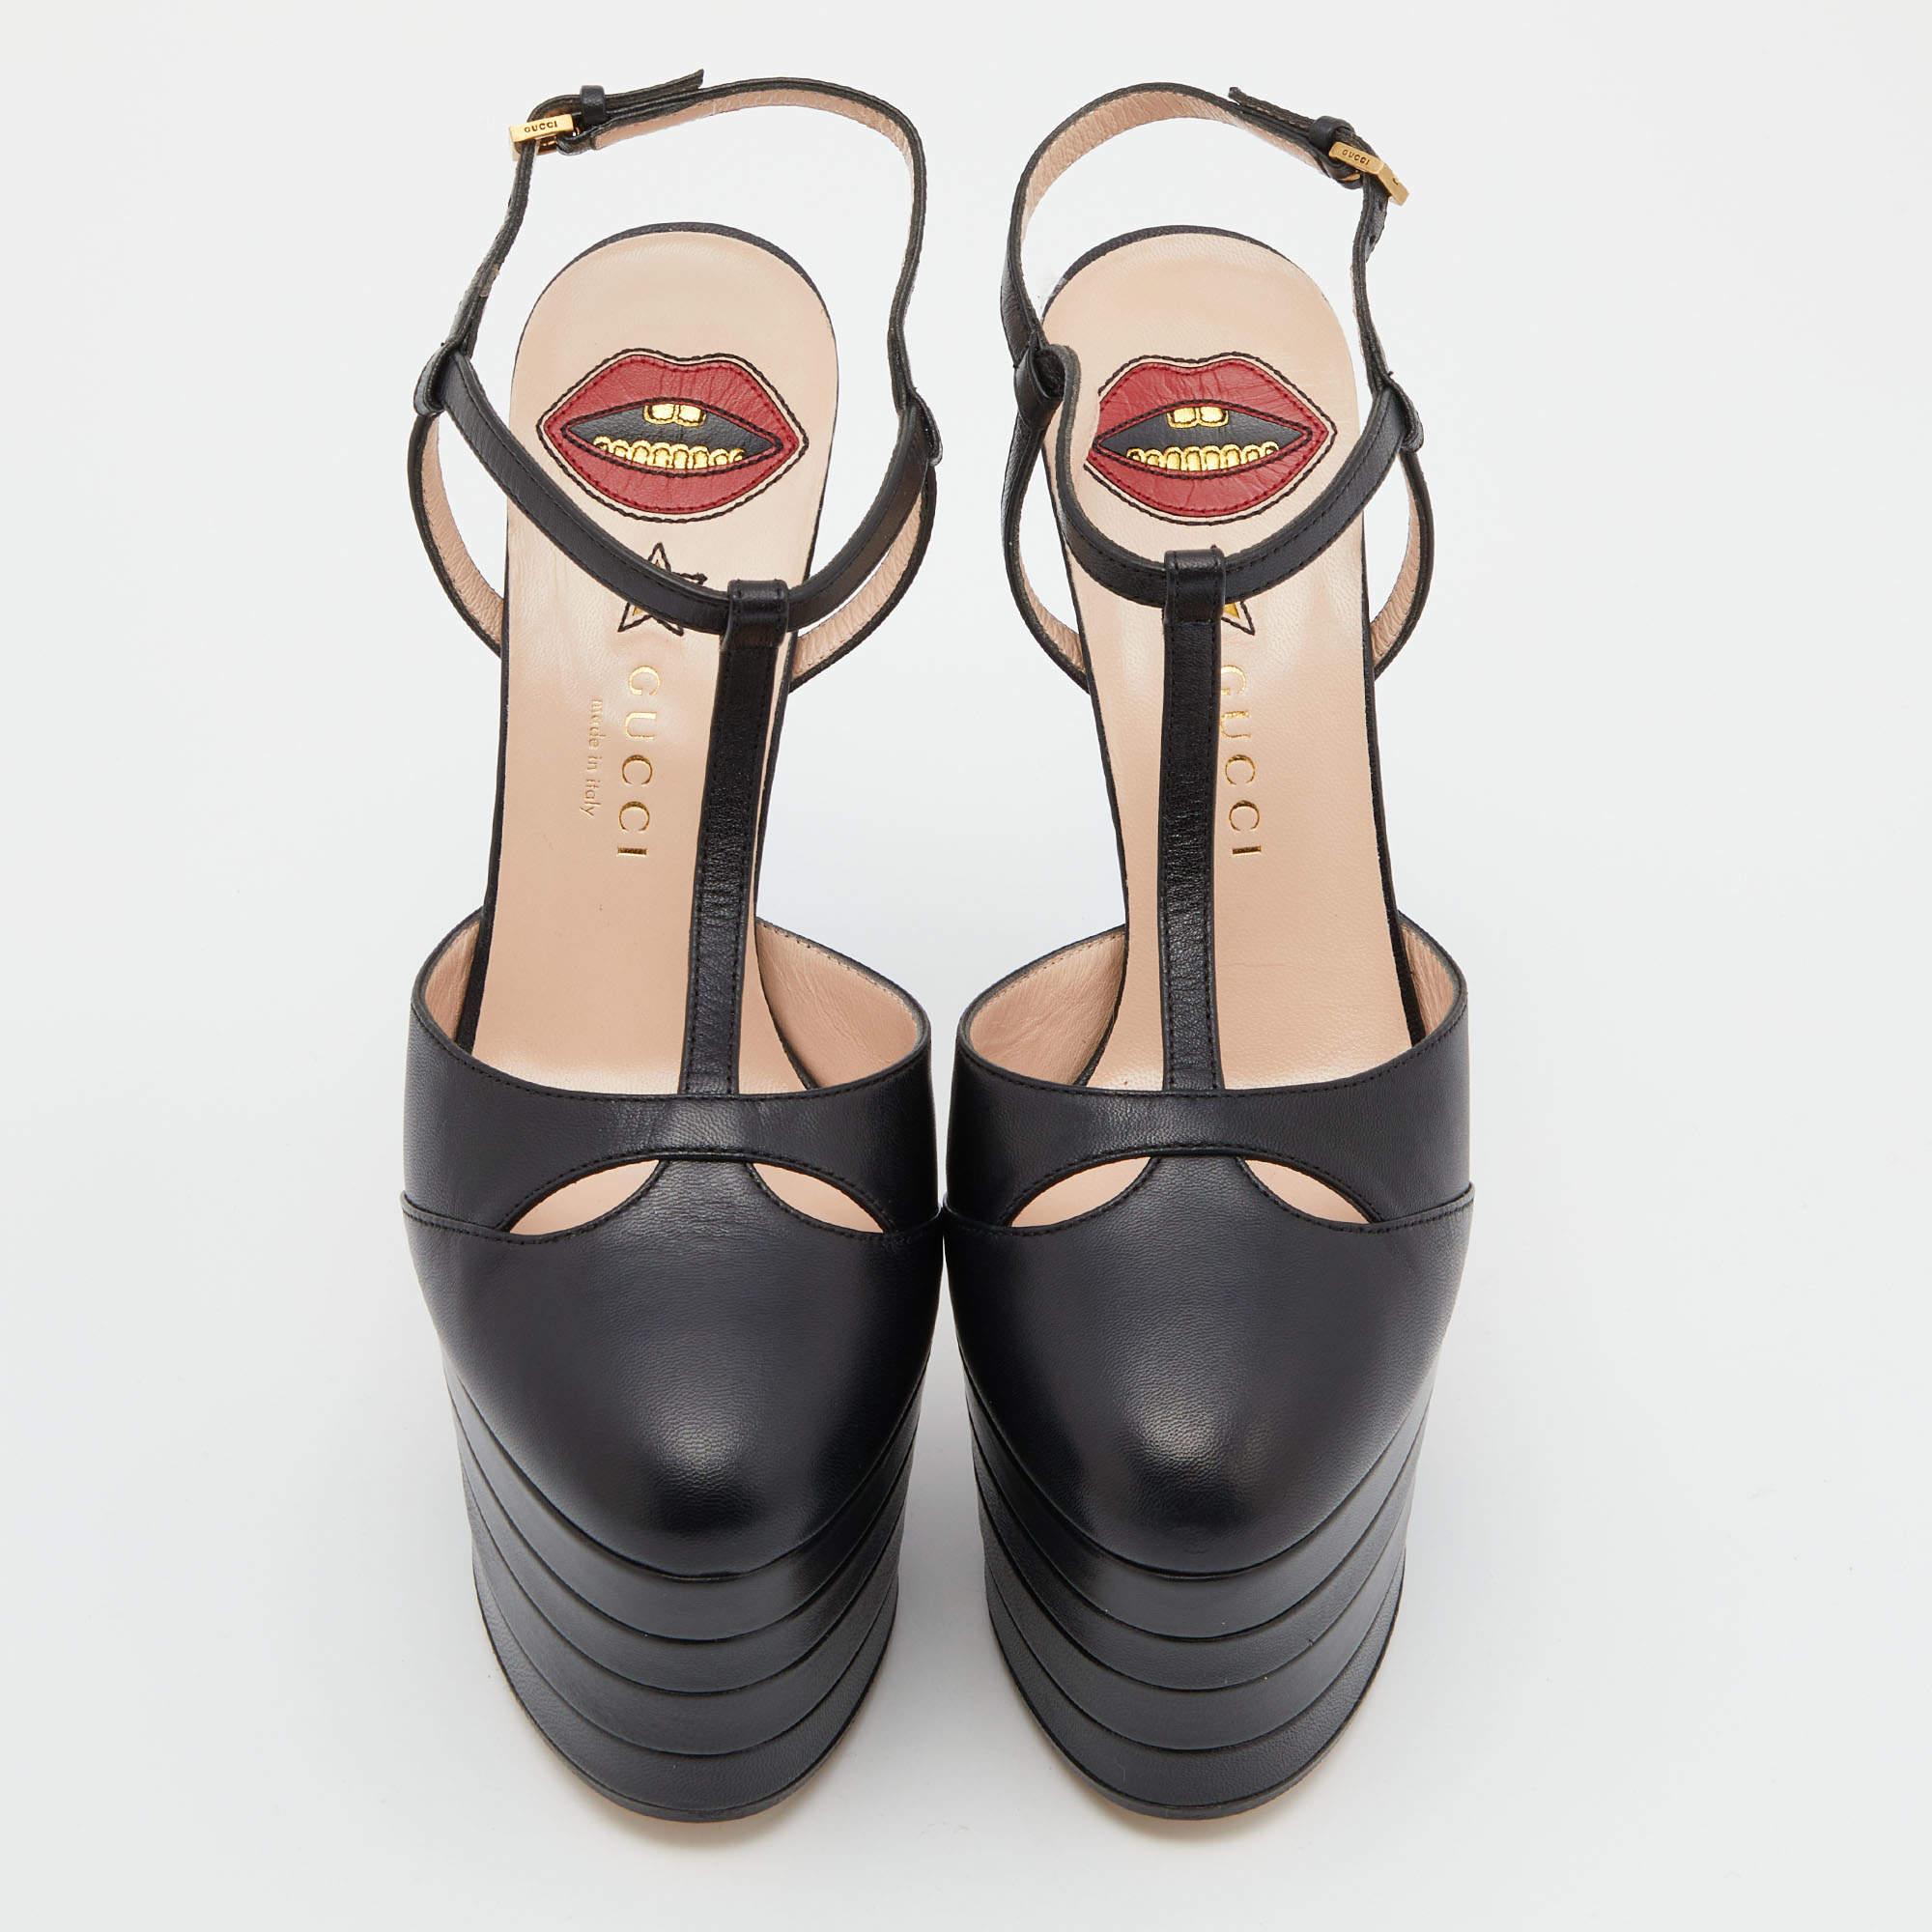 These Gucci sandals are meant to make a statement. They are designed to offer the best comfort, fit, and head-turning moments. These fashionable sandals are made from leather and set on high heels supported by exaggerated platforms.

Includes: